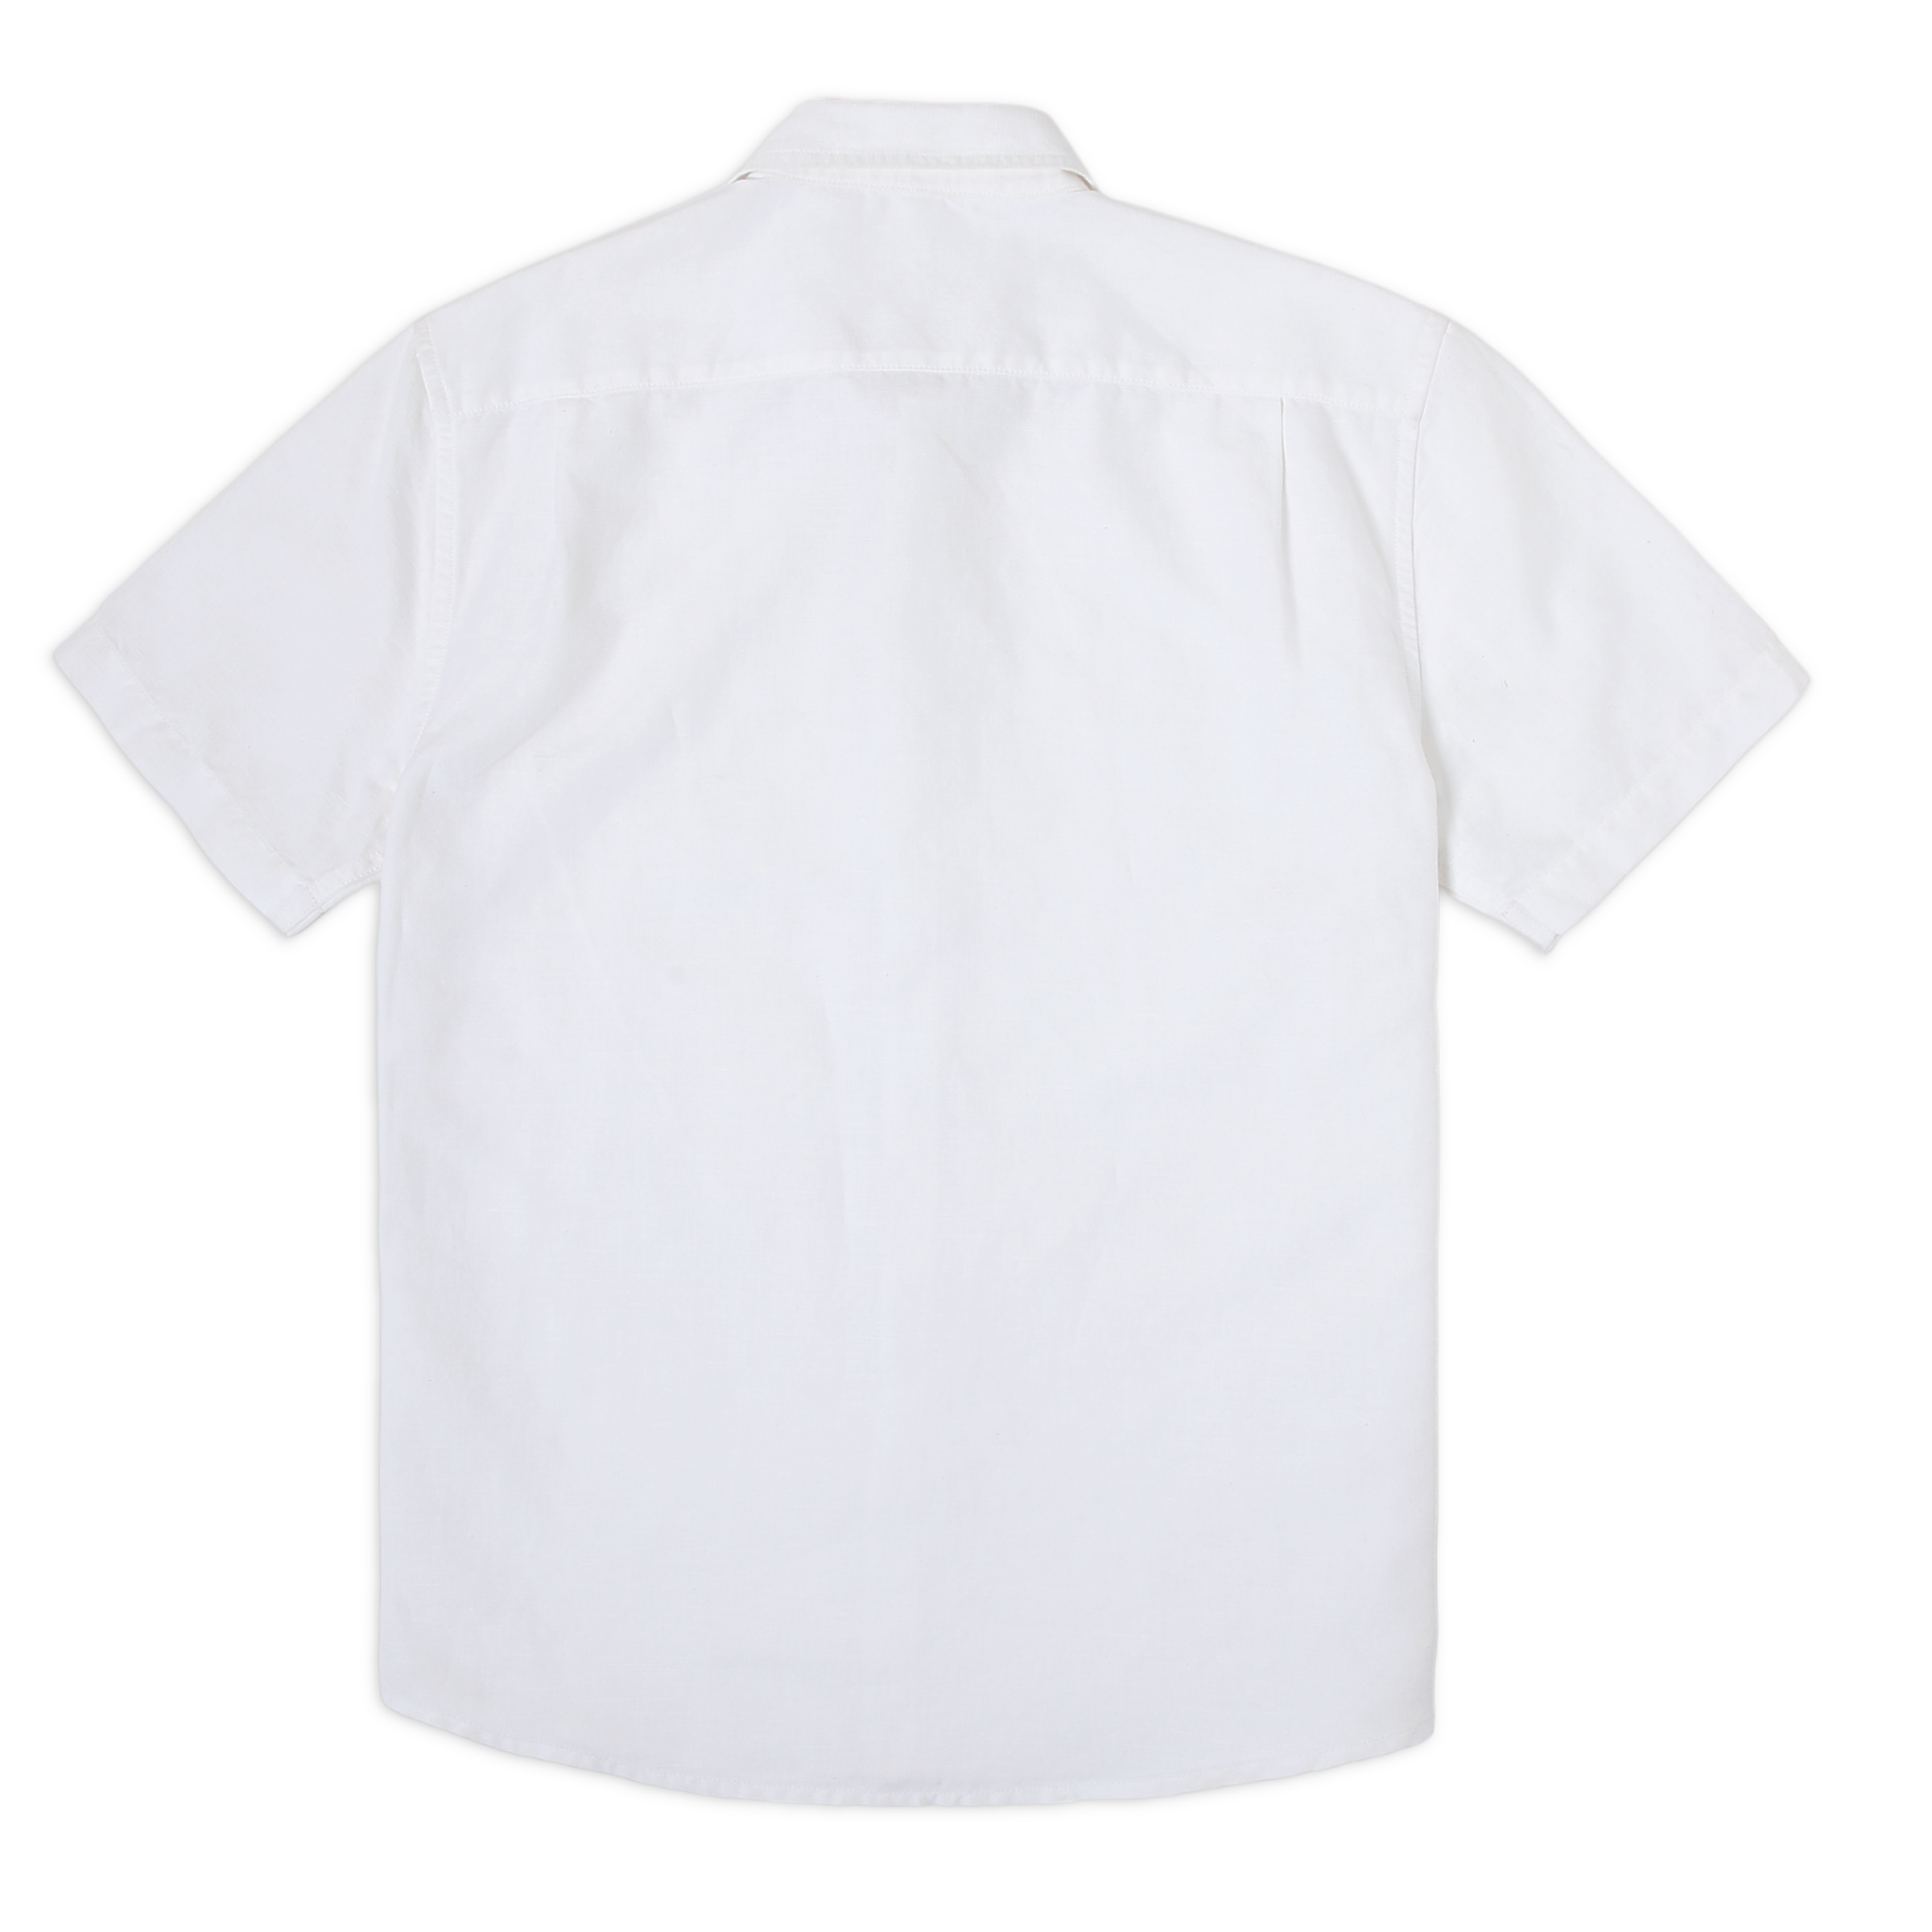 Retreat Linen Shirt White back with short sleeves and collar